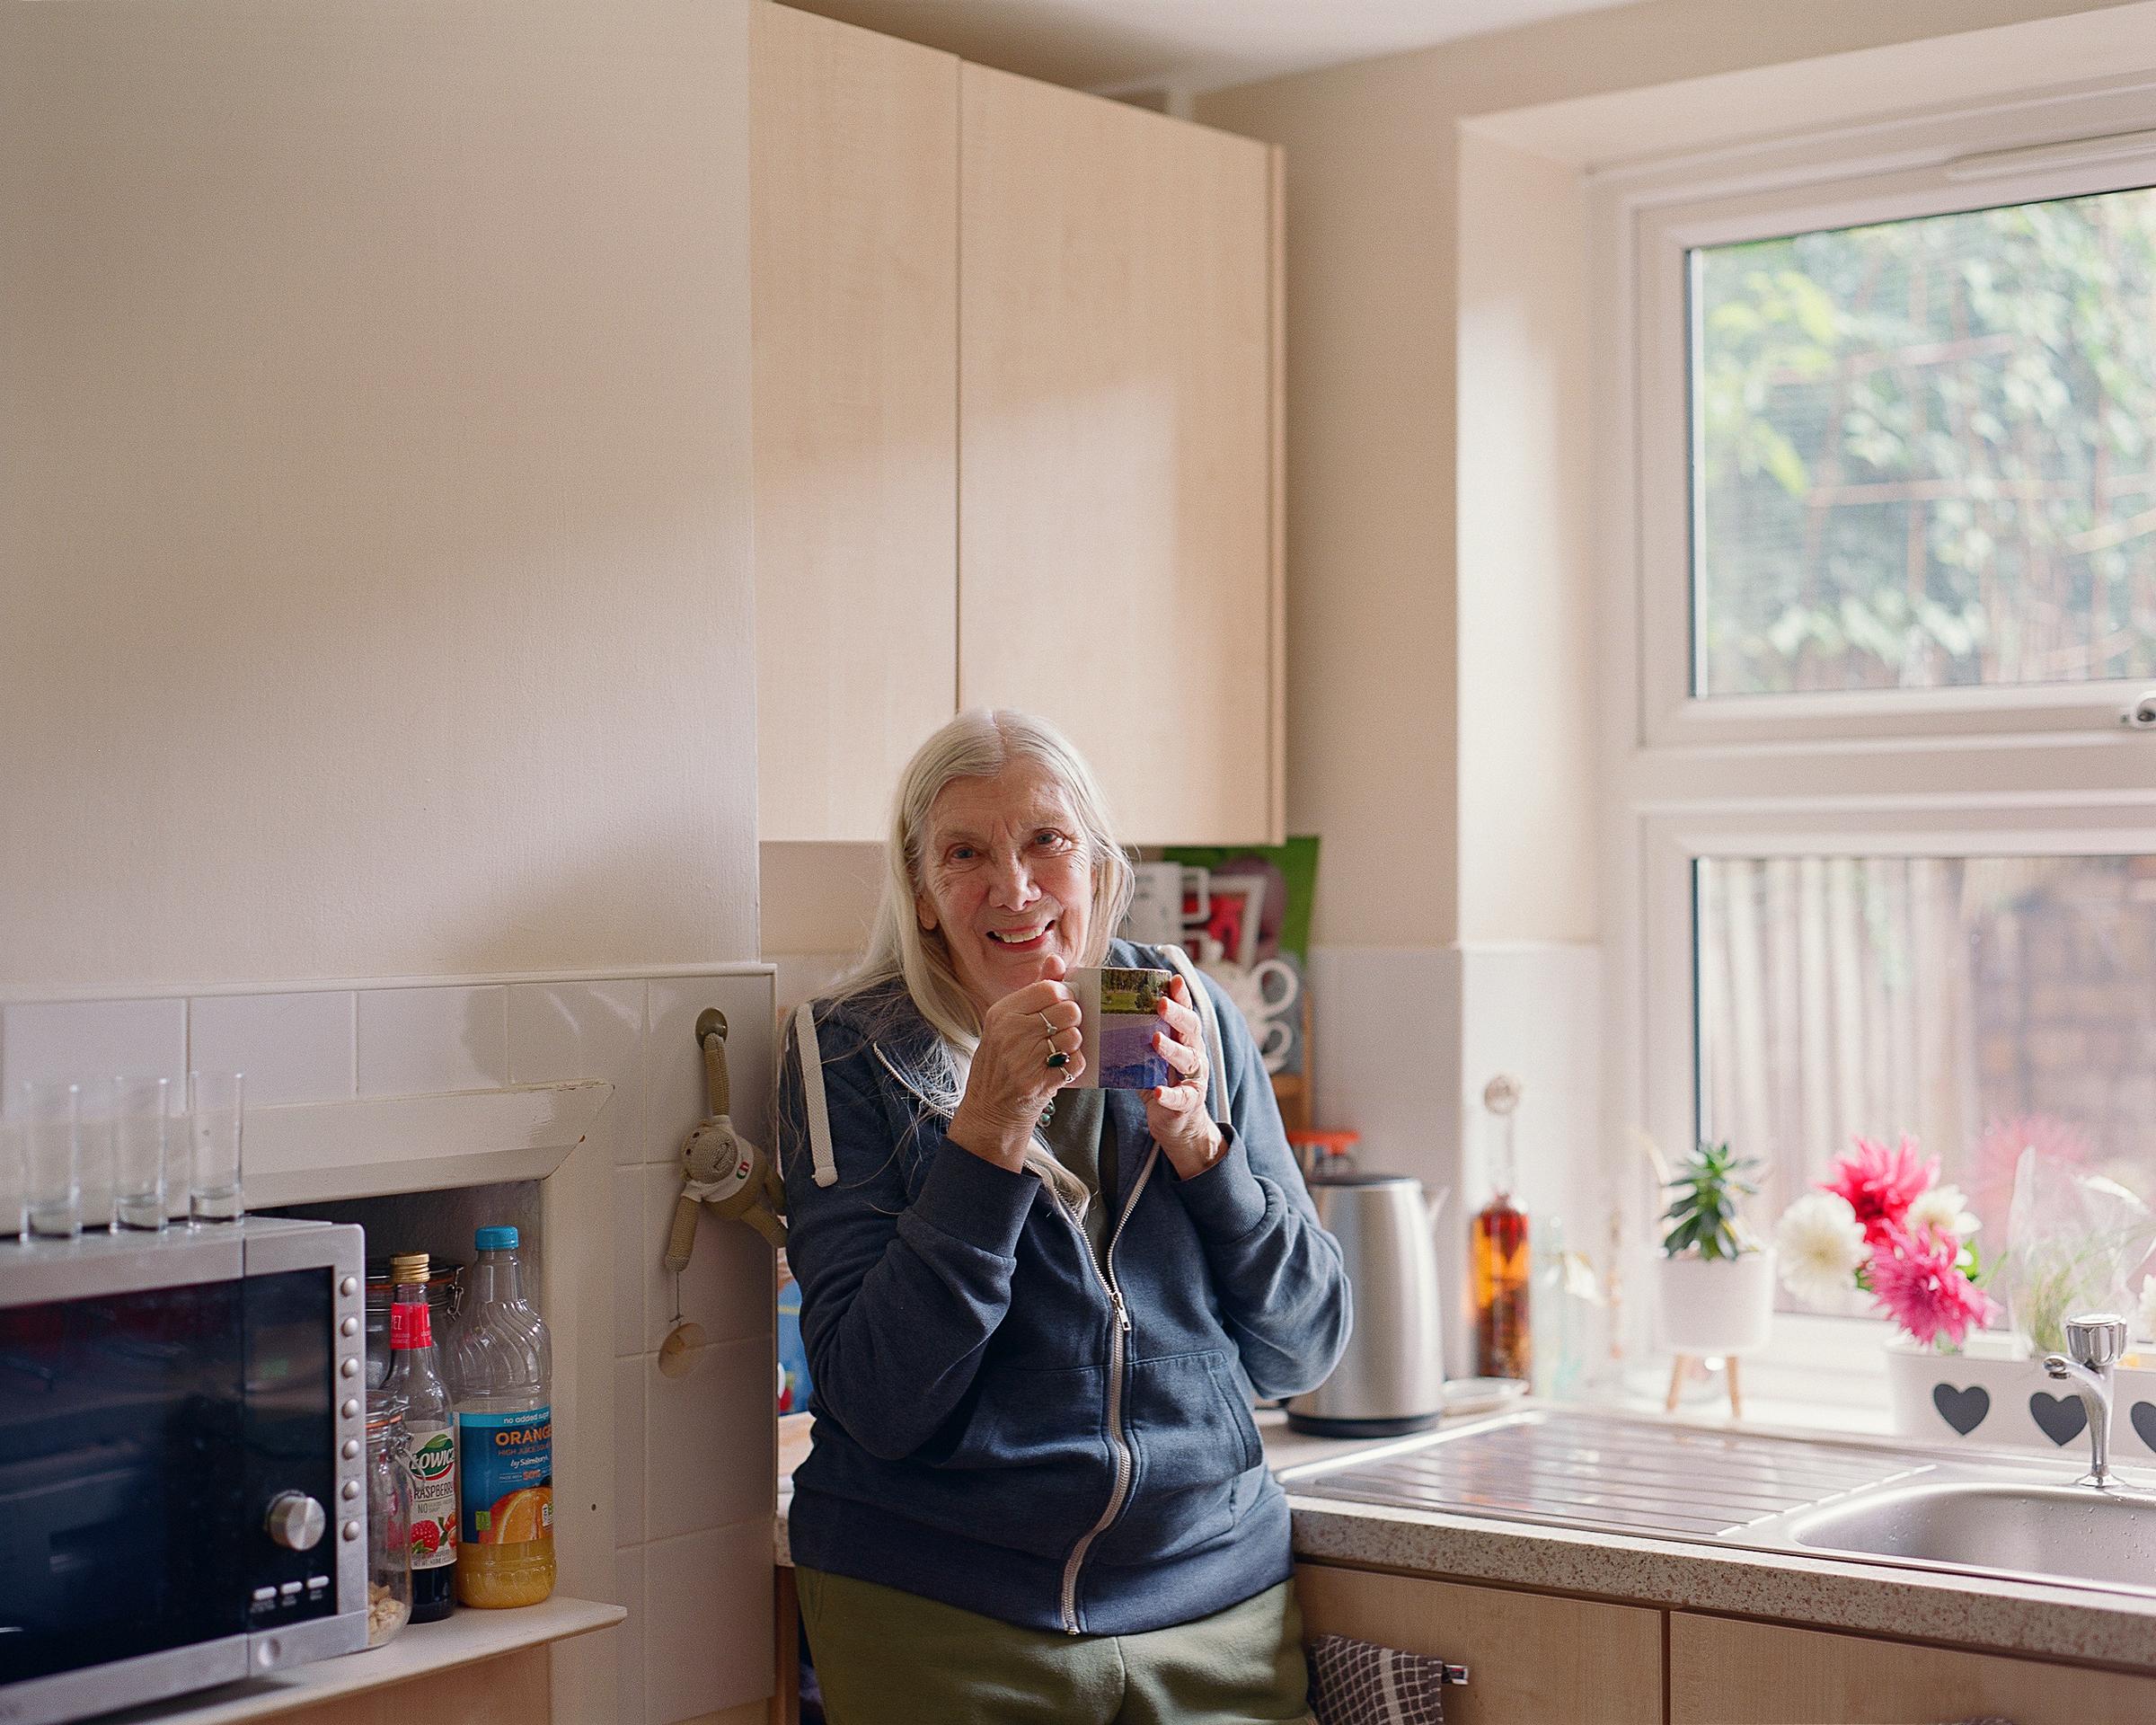 Smiling woman drinking a cup of tea in a kitchen.